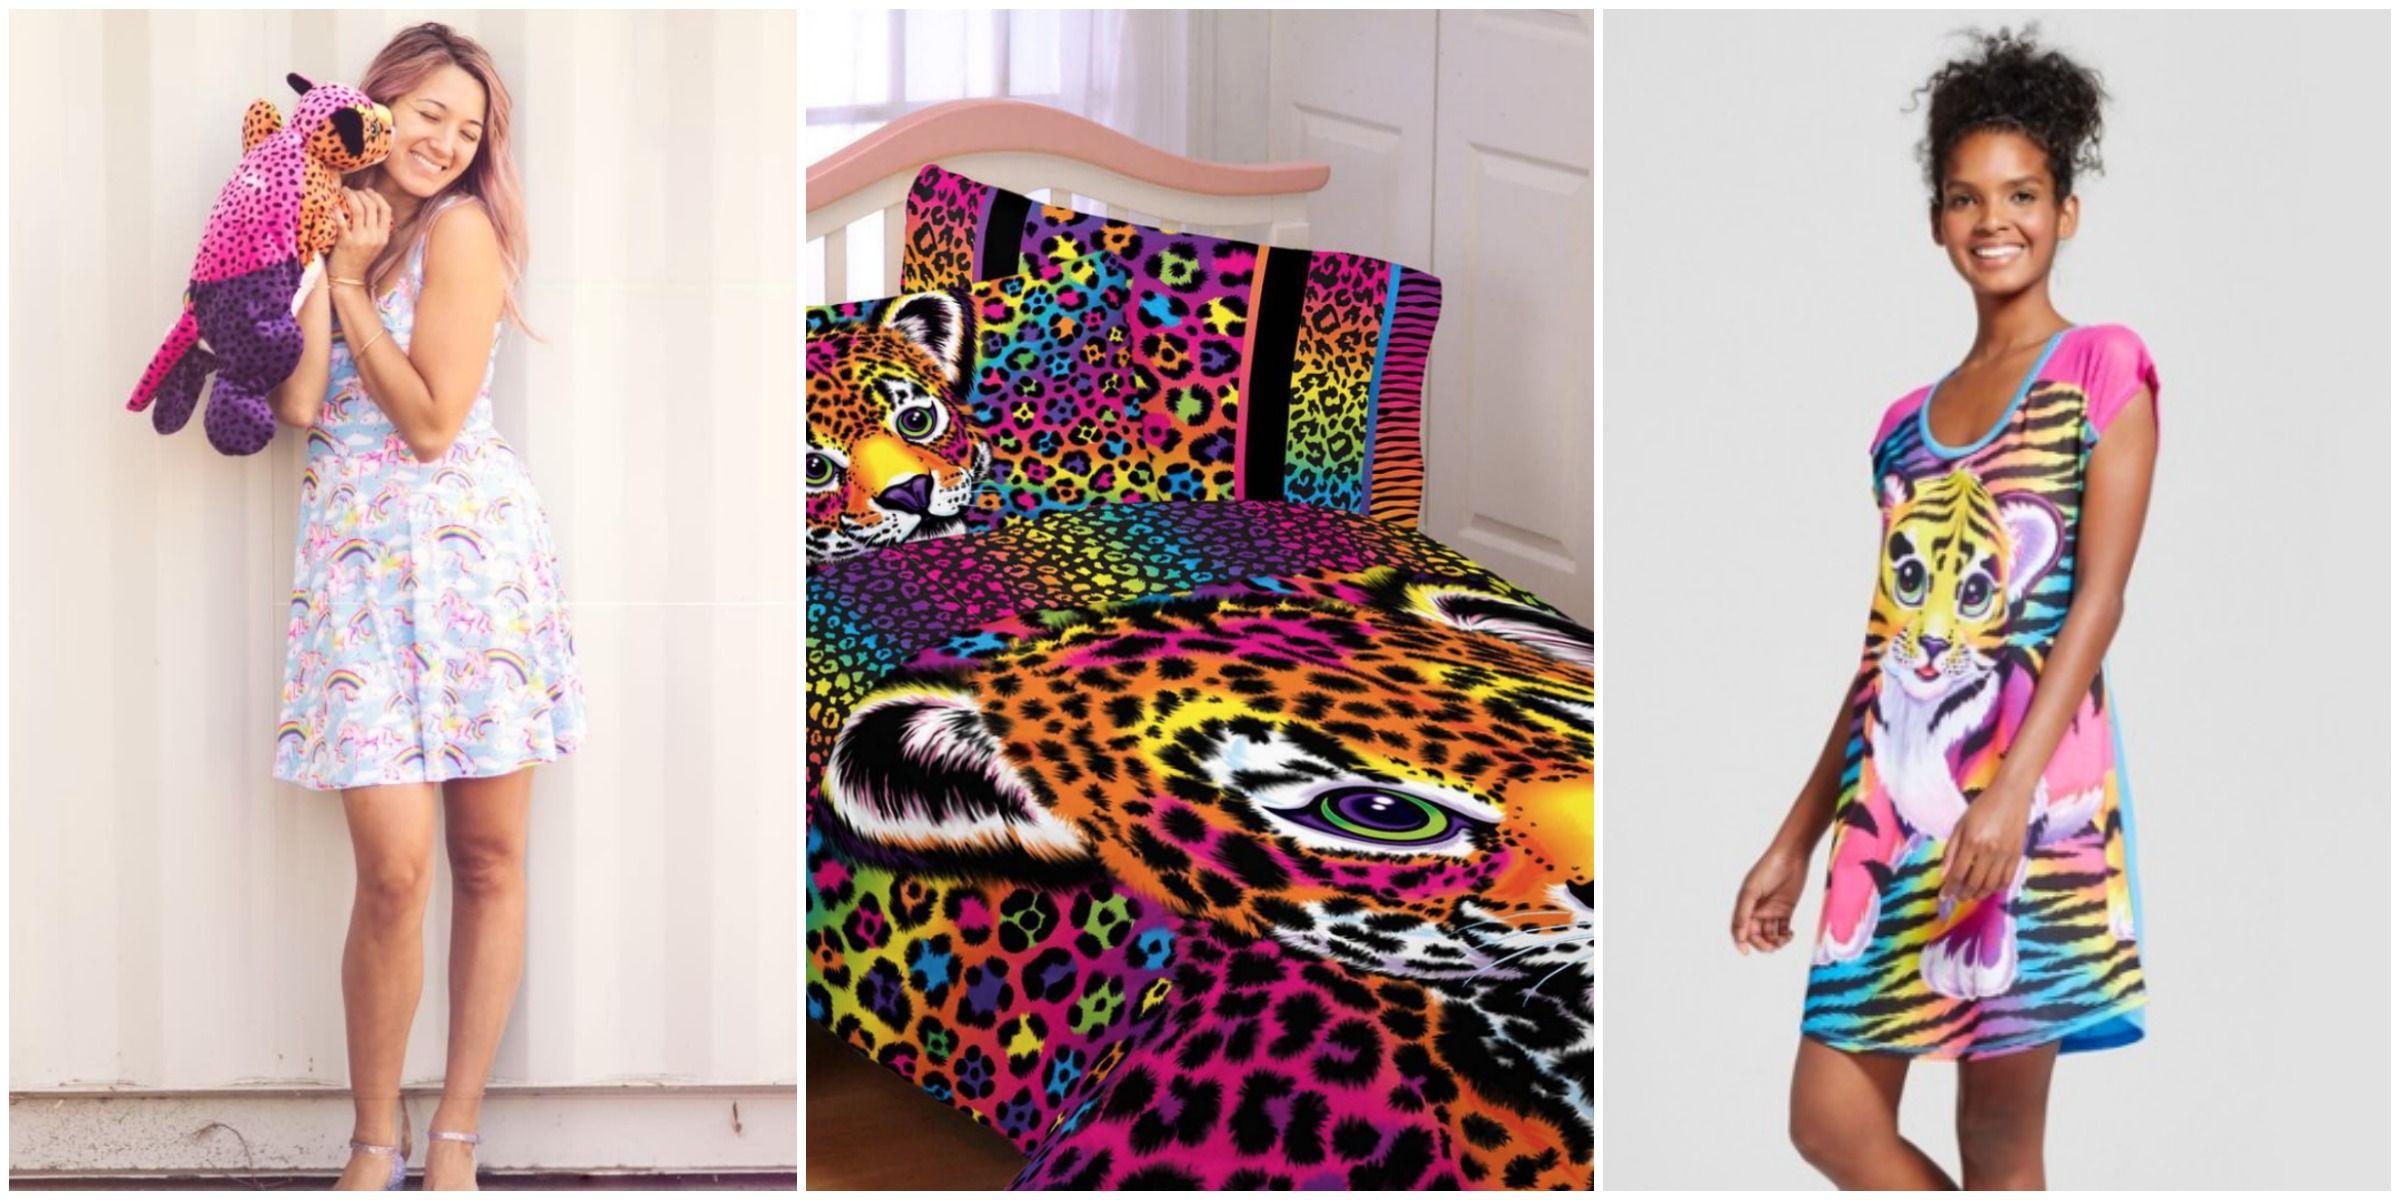 puntada Tortuga evidencia Lisa Frank Products You Can Buy Now - Lisa Frank Bedding